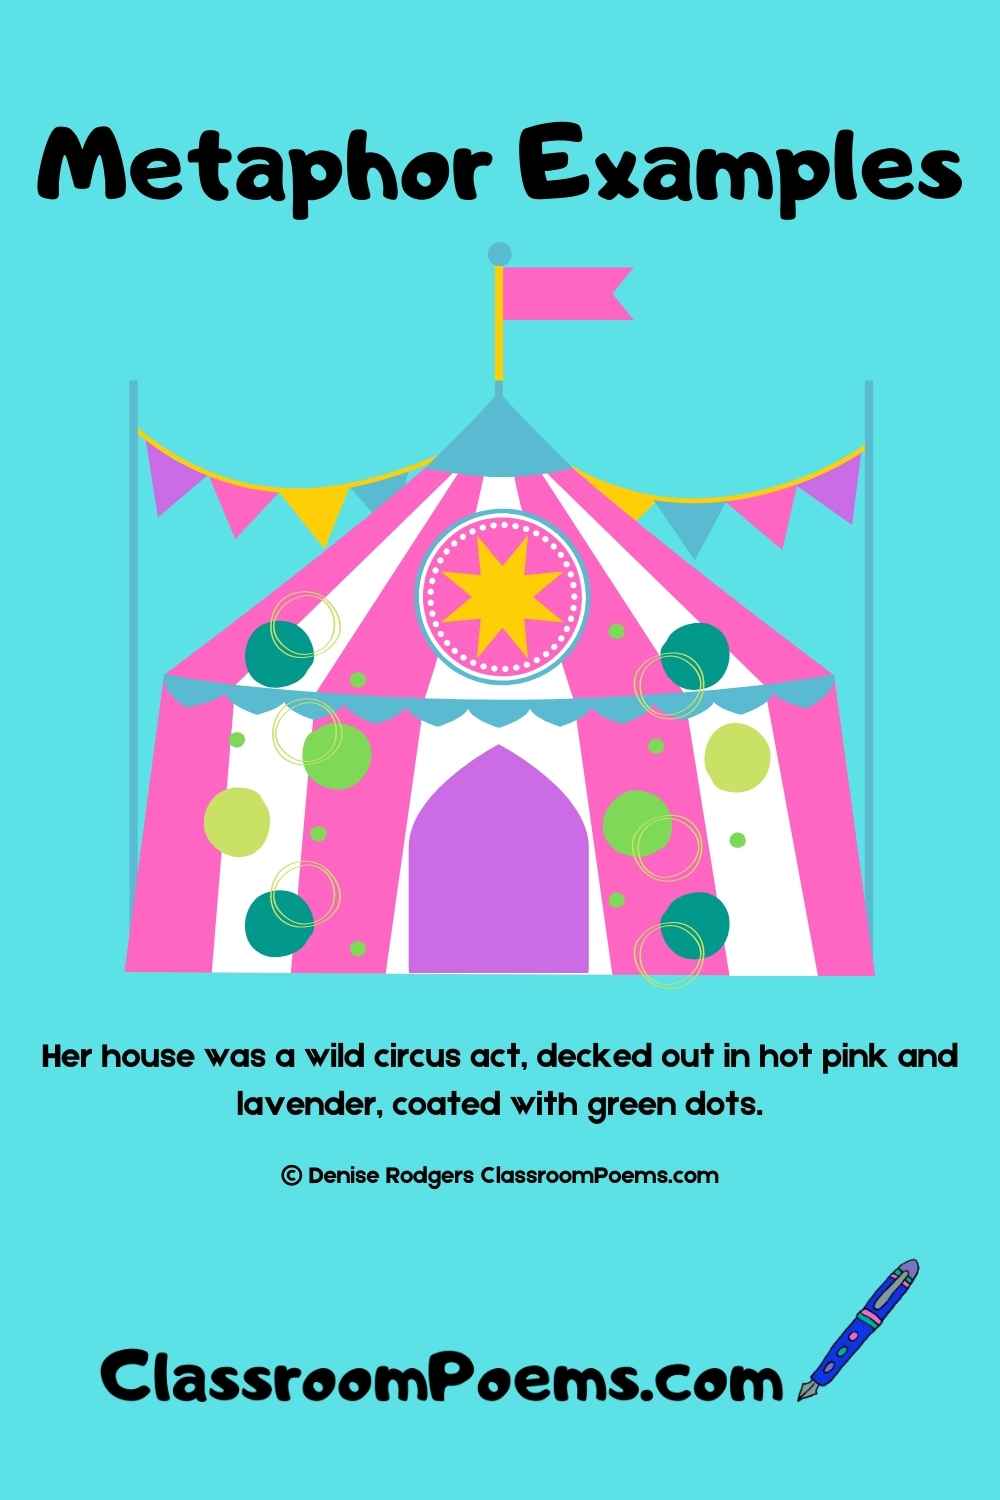 Circus tent metaphor example by Denise Rodgers on  ClassroomPoems.com.